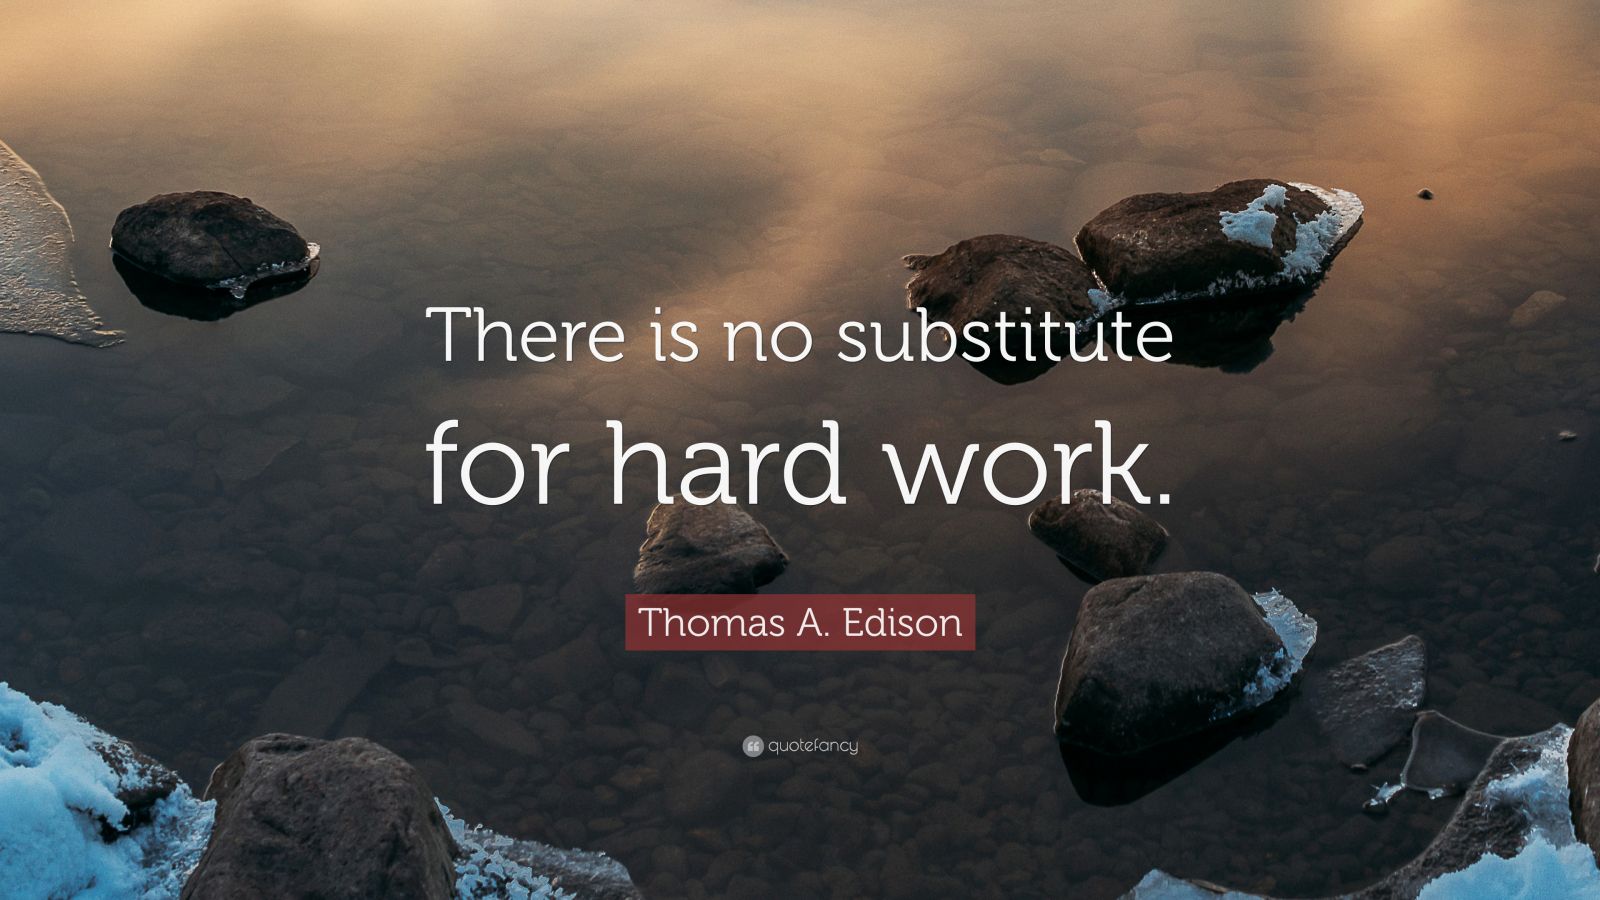 essay on there is no substitute for hard work